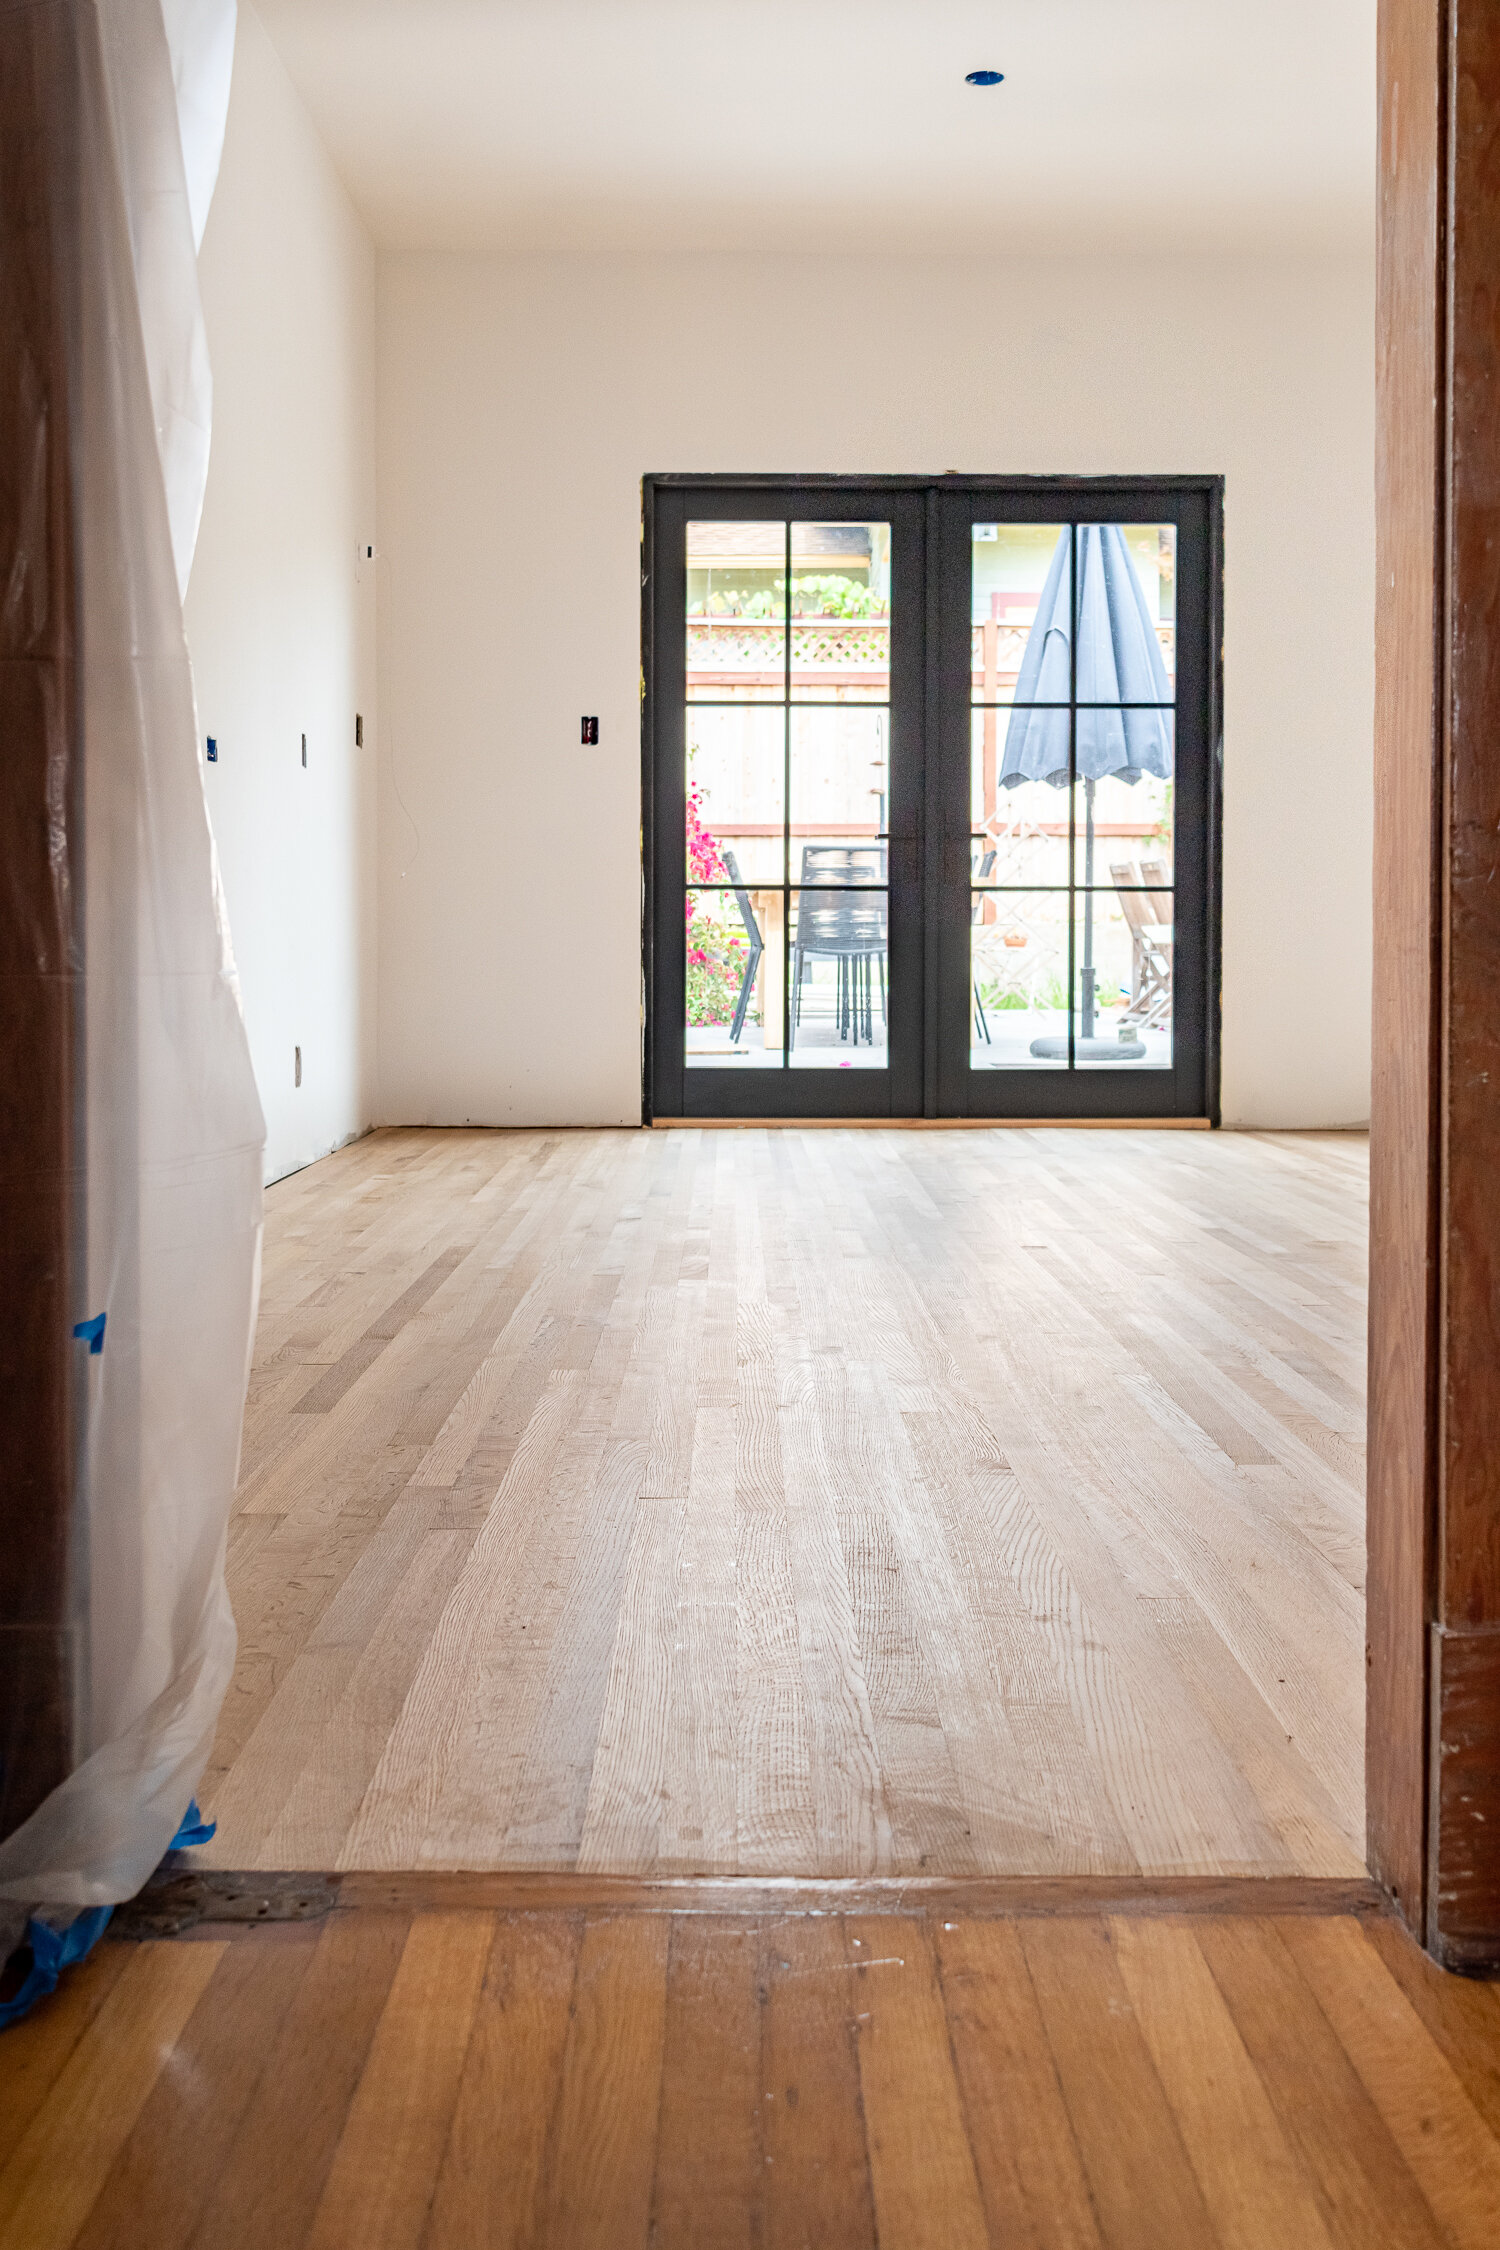 Installing New Hardwood Floors In Our, How Much To Have Hardwood Floors Installed